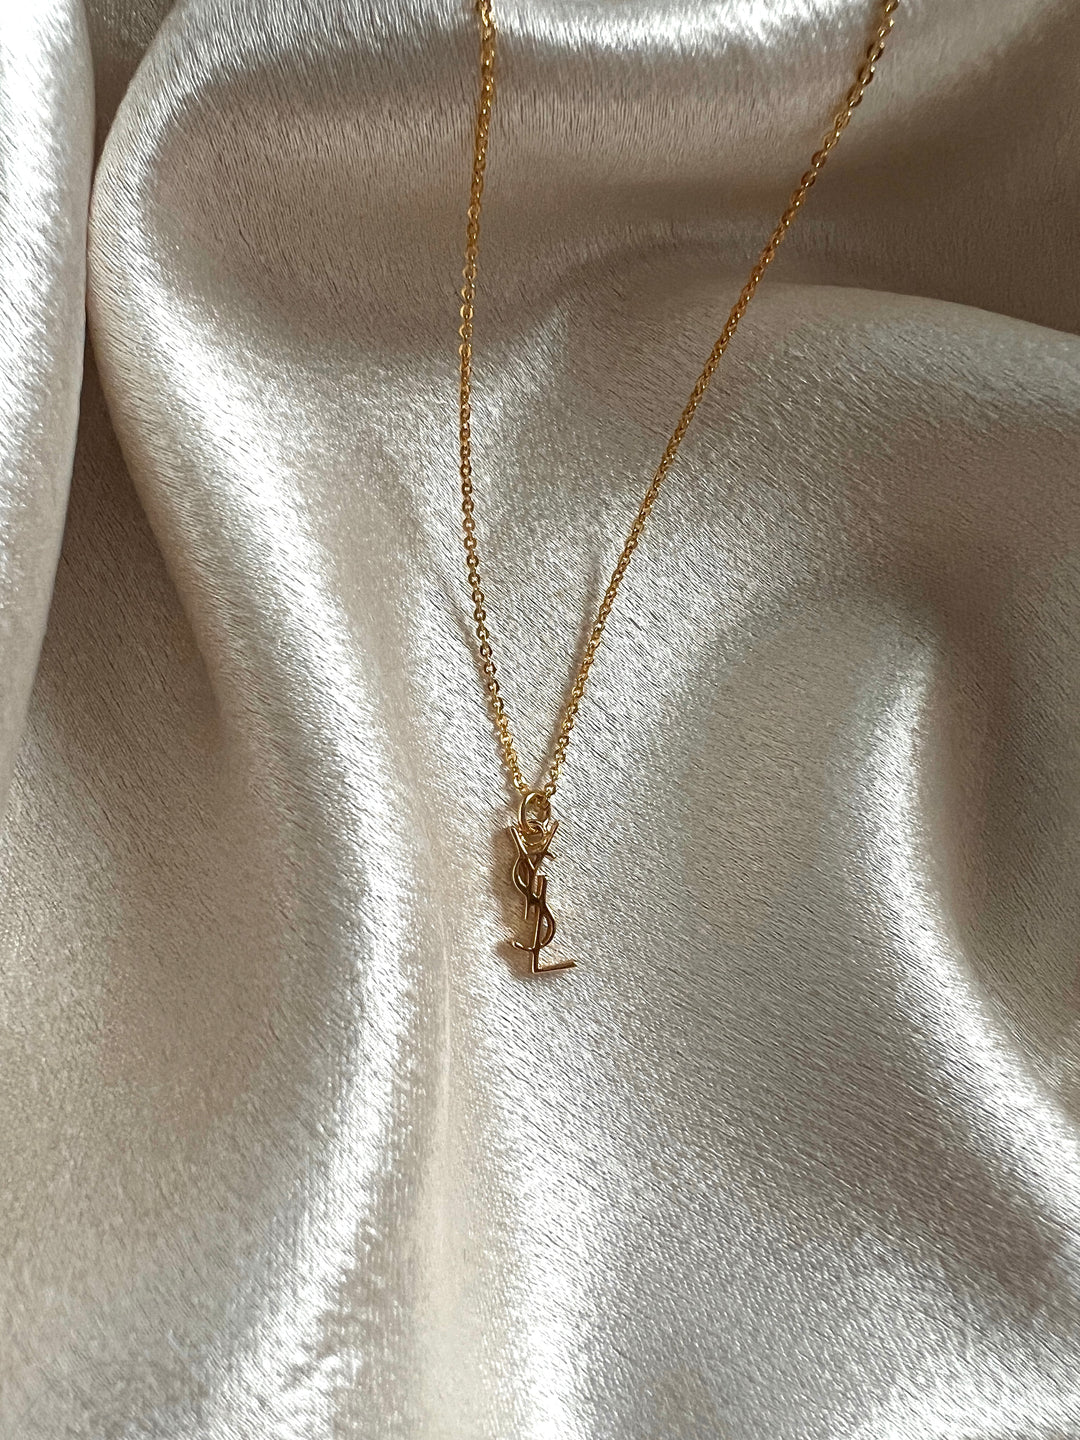 Dainty YSL Necklace | REWORKED